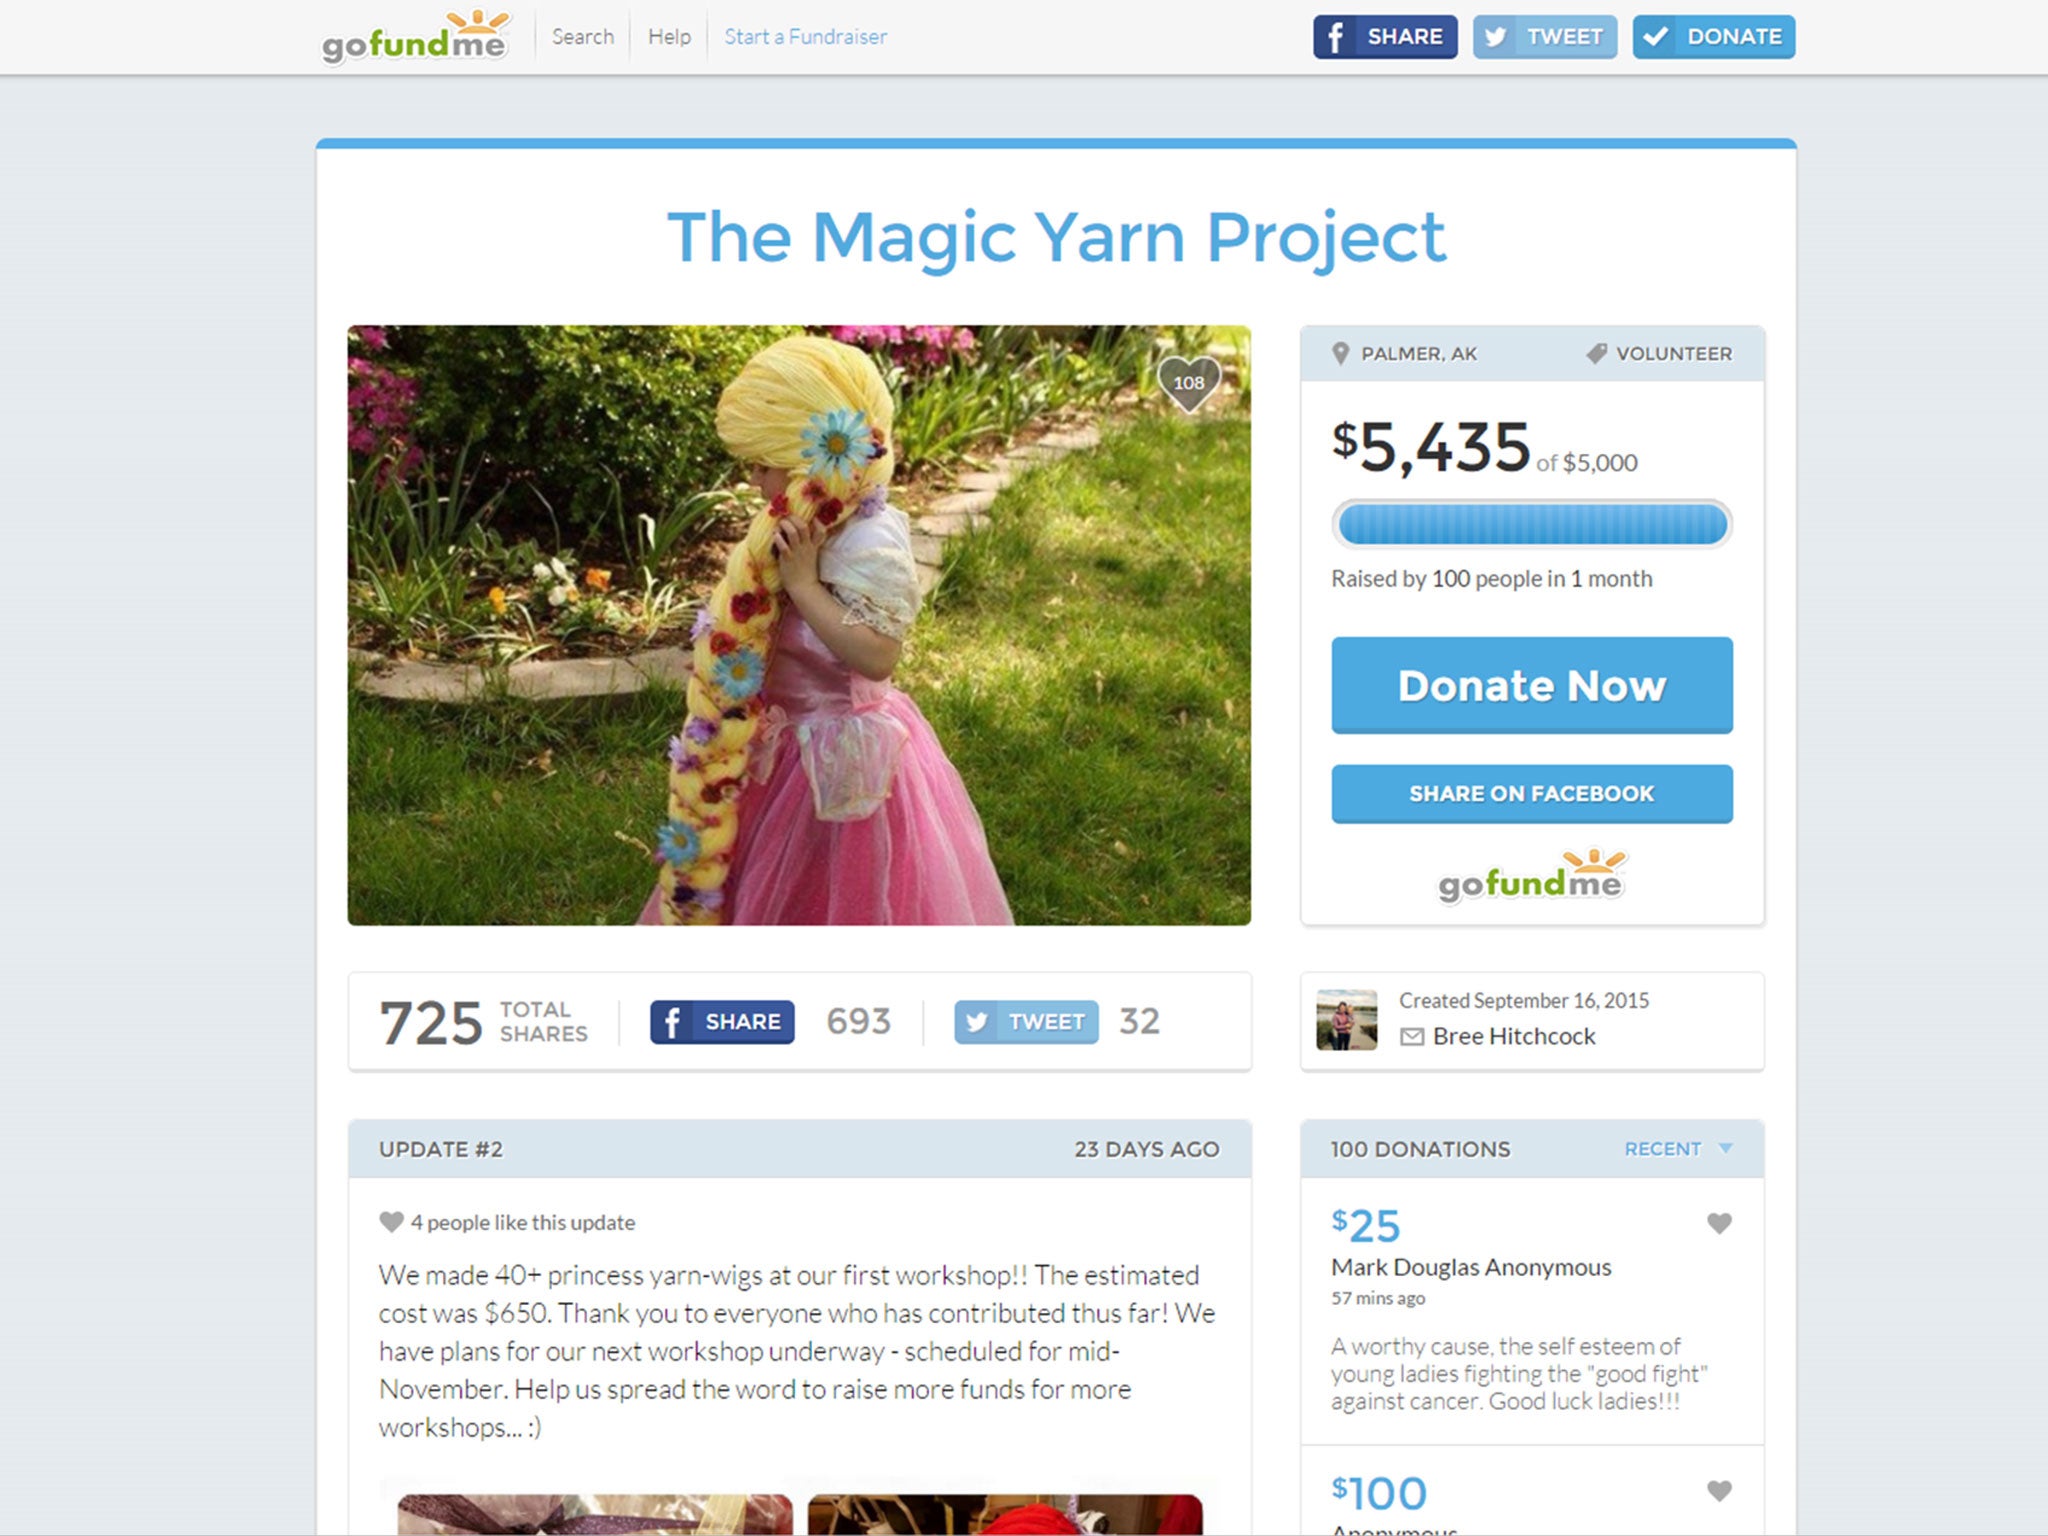 The GoFundMe page of the Magic Yarn Project